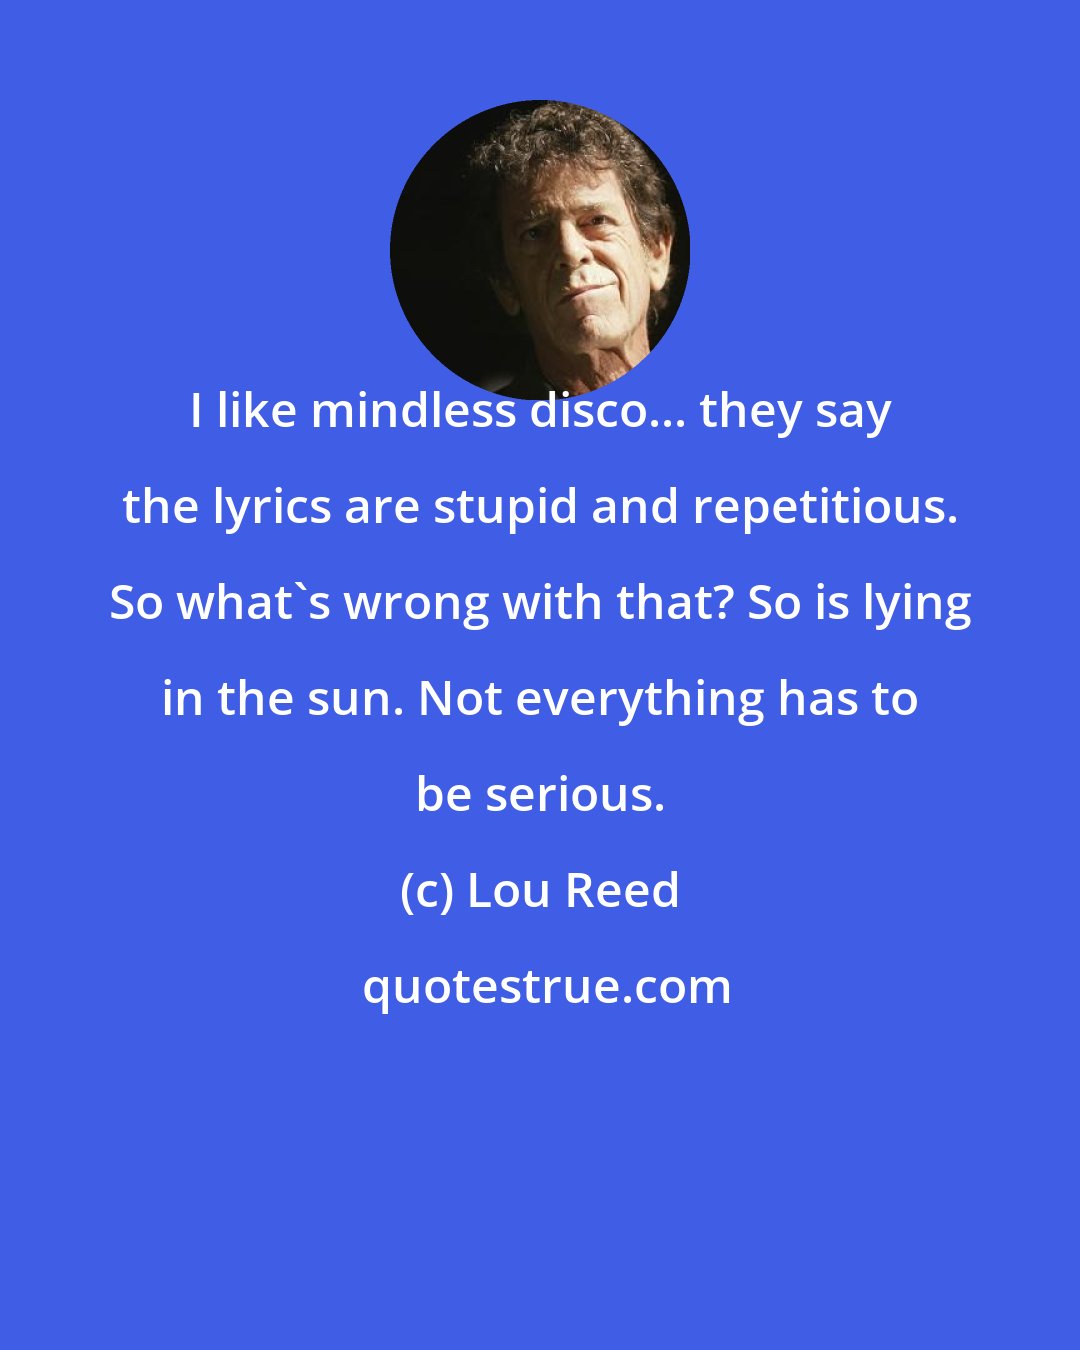 Lou Reed: I like mindless disco... they say the lyrics are stupid and repetitious. So what's wrong with that? So is lying in the sun. Not everything has to be serious.